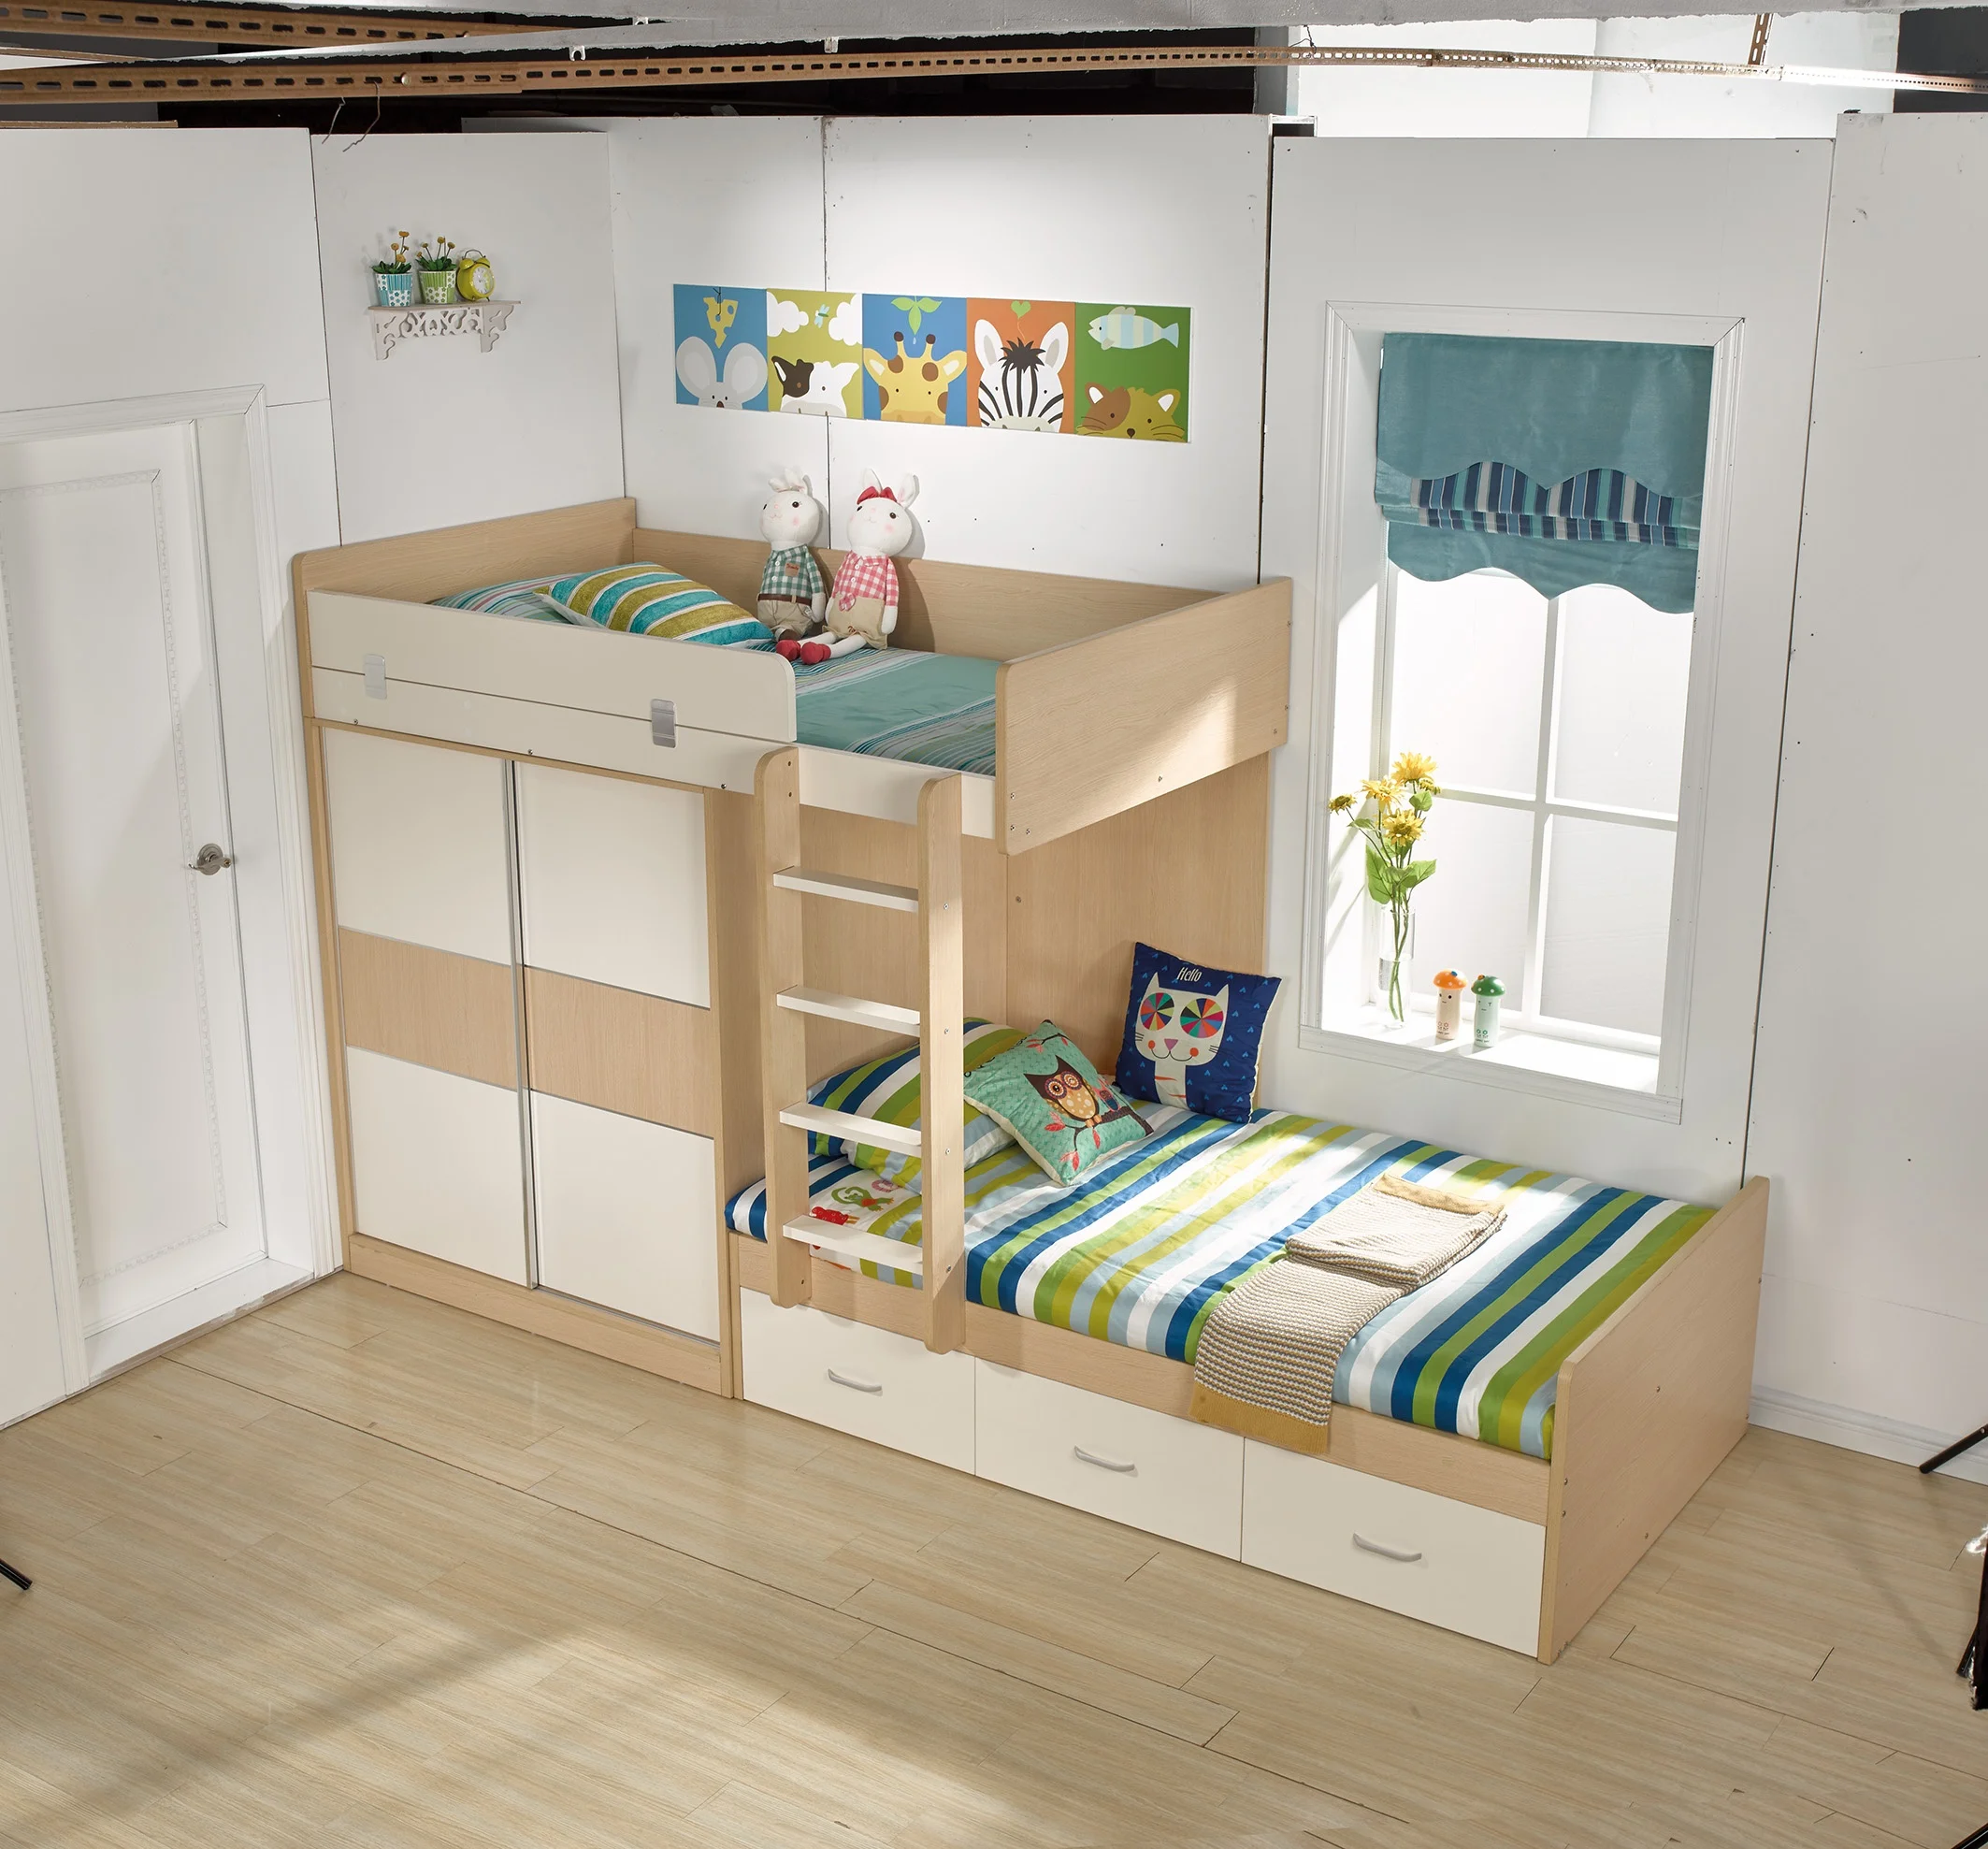 kids bed with wardrobe